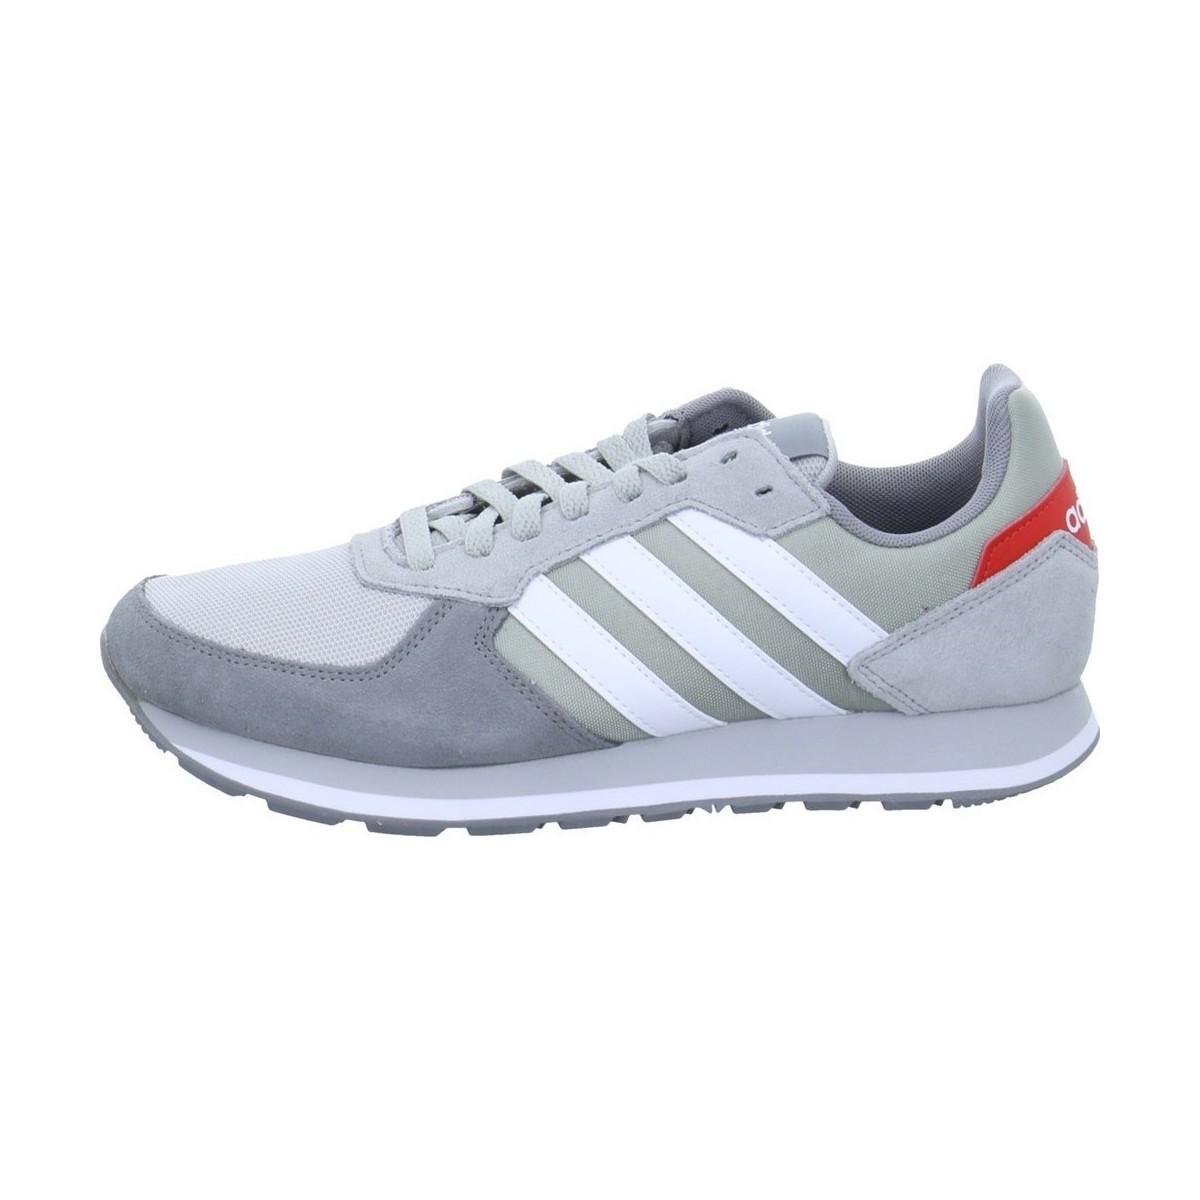 adidas 8k mens trainers